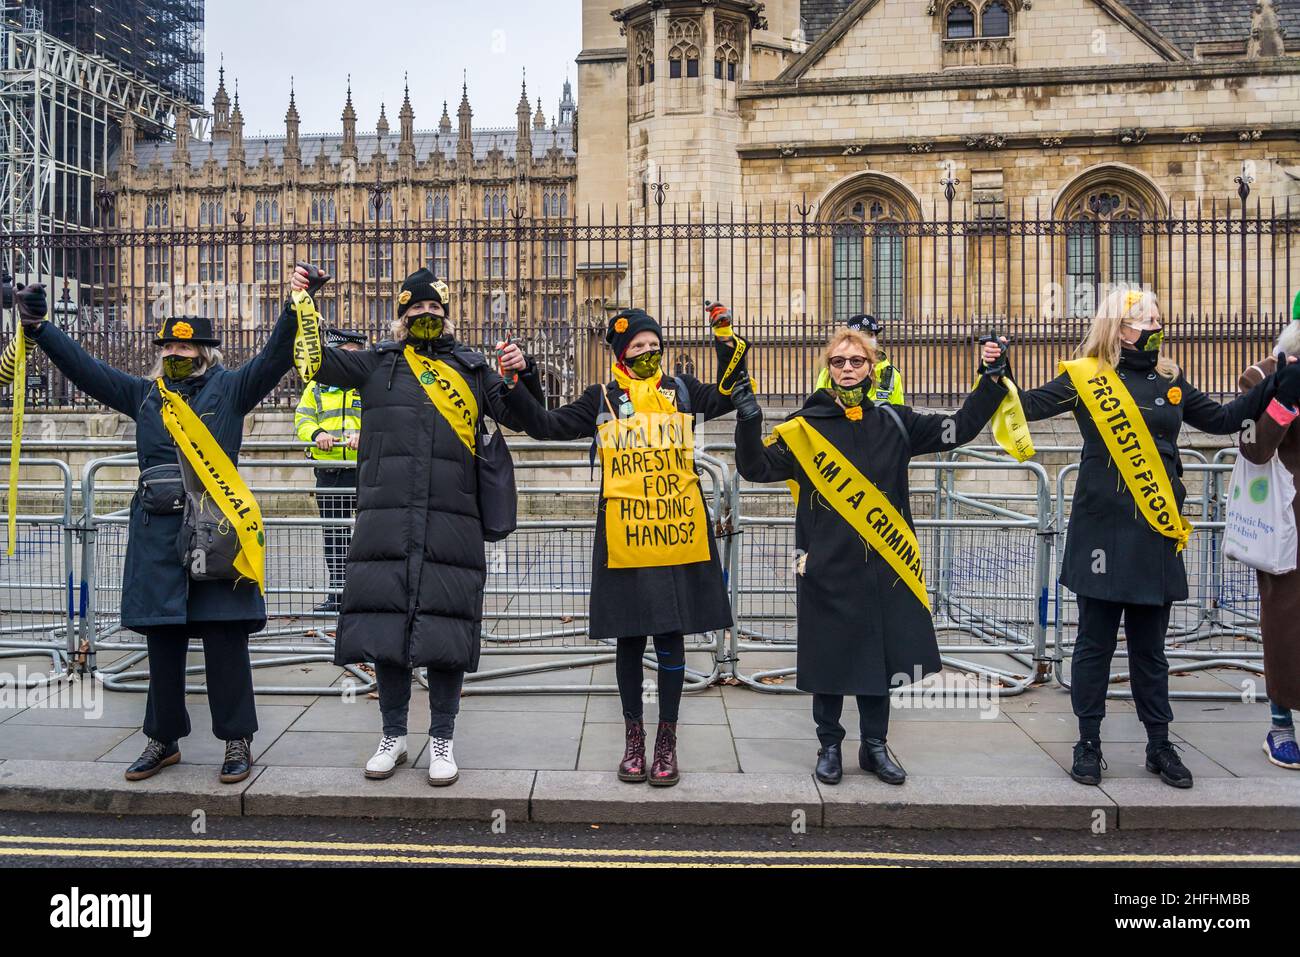 Women dressed as suffragettes take part in 'Kill the Bill' demonstration in front of the Houses of Parliament, ahead of a vote in the House of Lords. The bill on Police, Crime, Sentencing and Courts poses a threat to the right to protest. London, England, UK 15.01.2022 Stock Photo